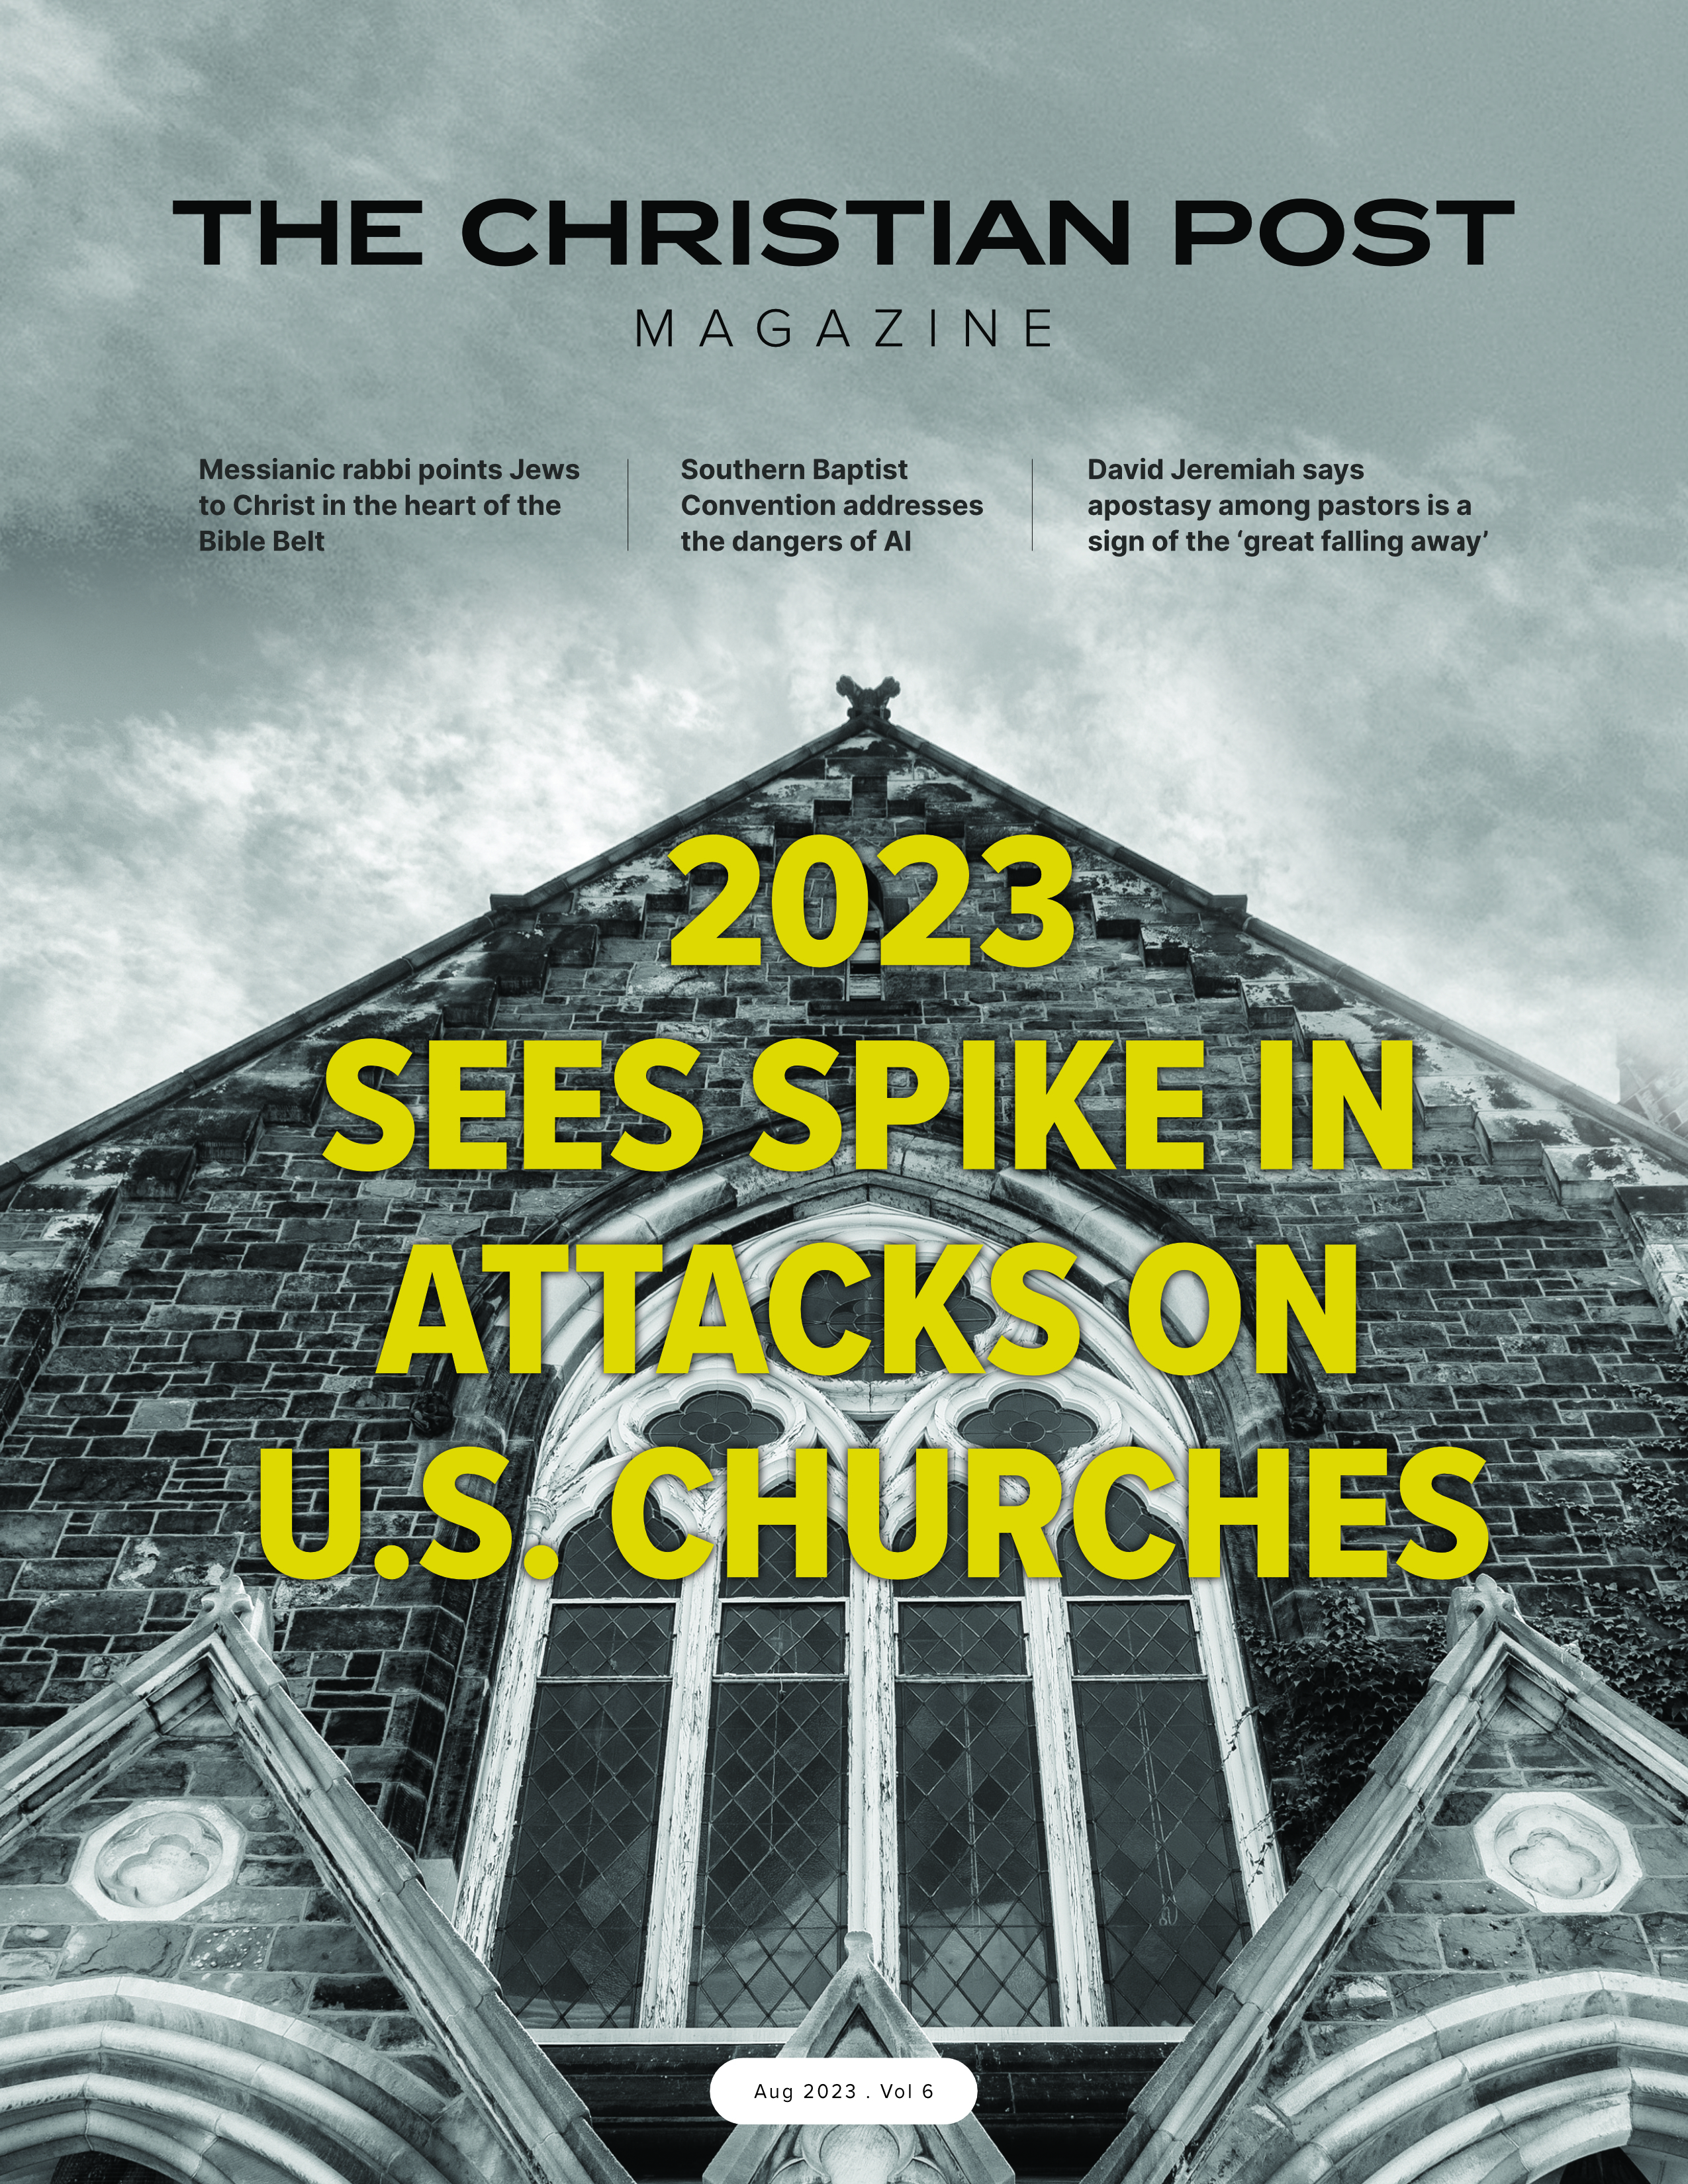 2023 Sees Spike In Attacks On U.S. Churches